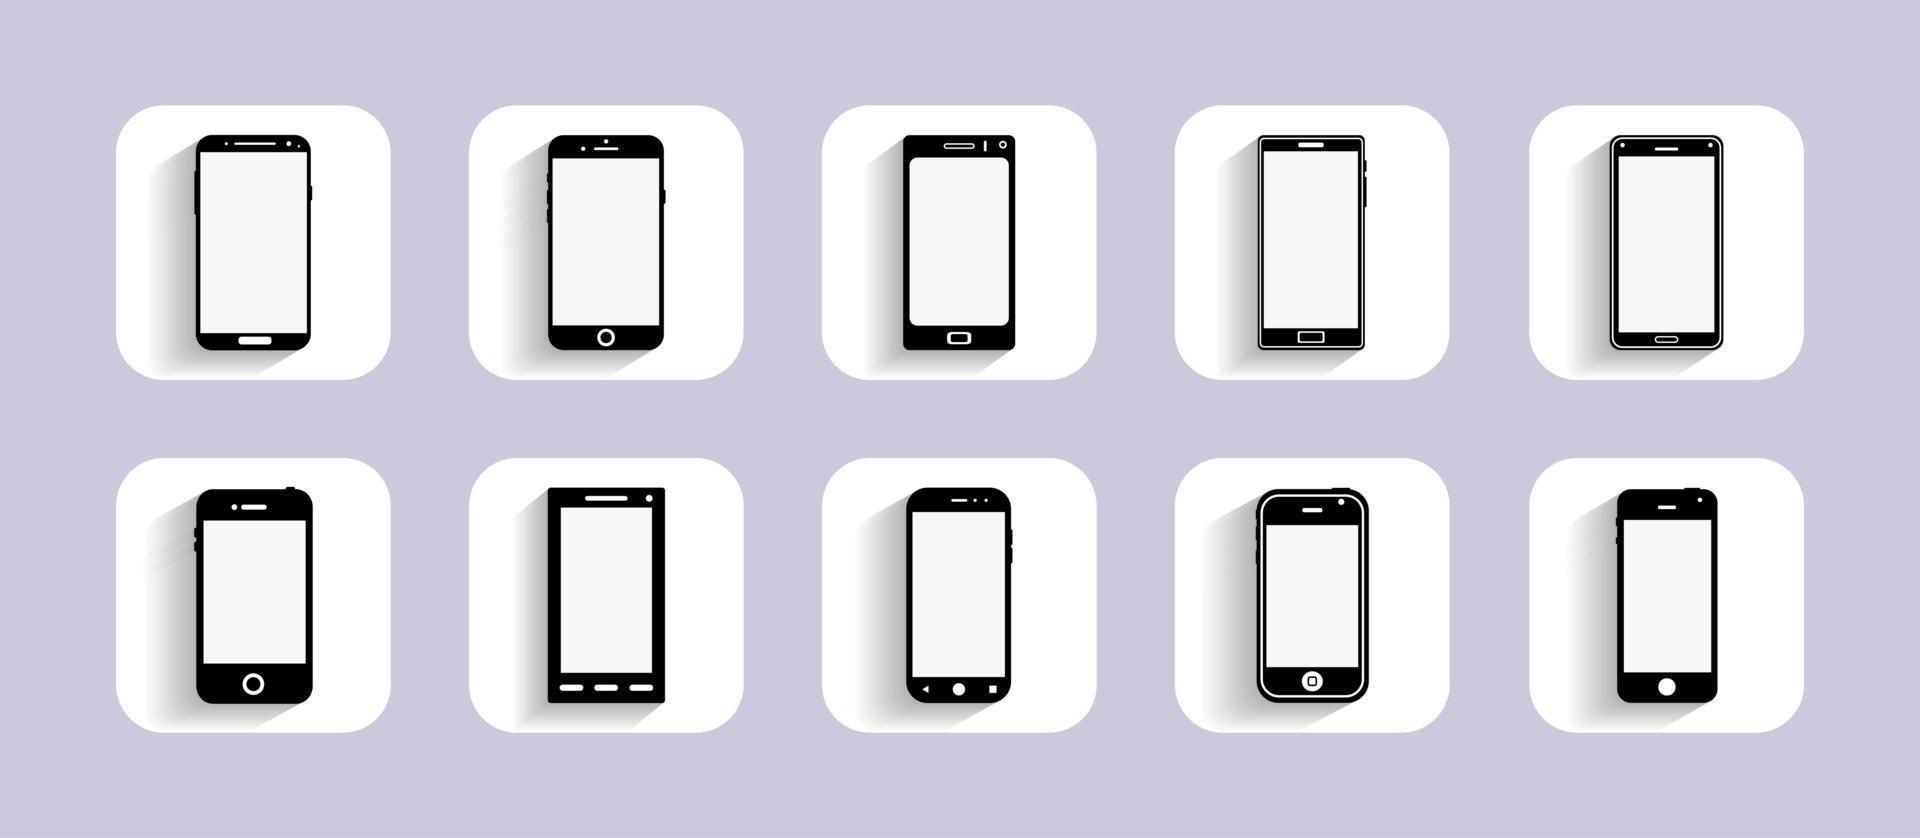 Mobile Devices Icons for user interface design and website. Flat design. Vector illustration